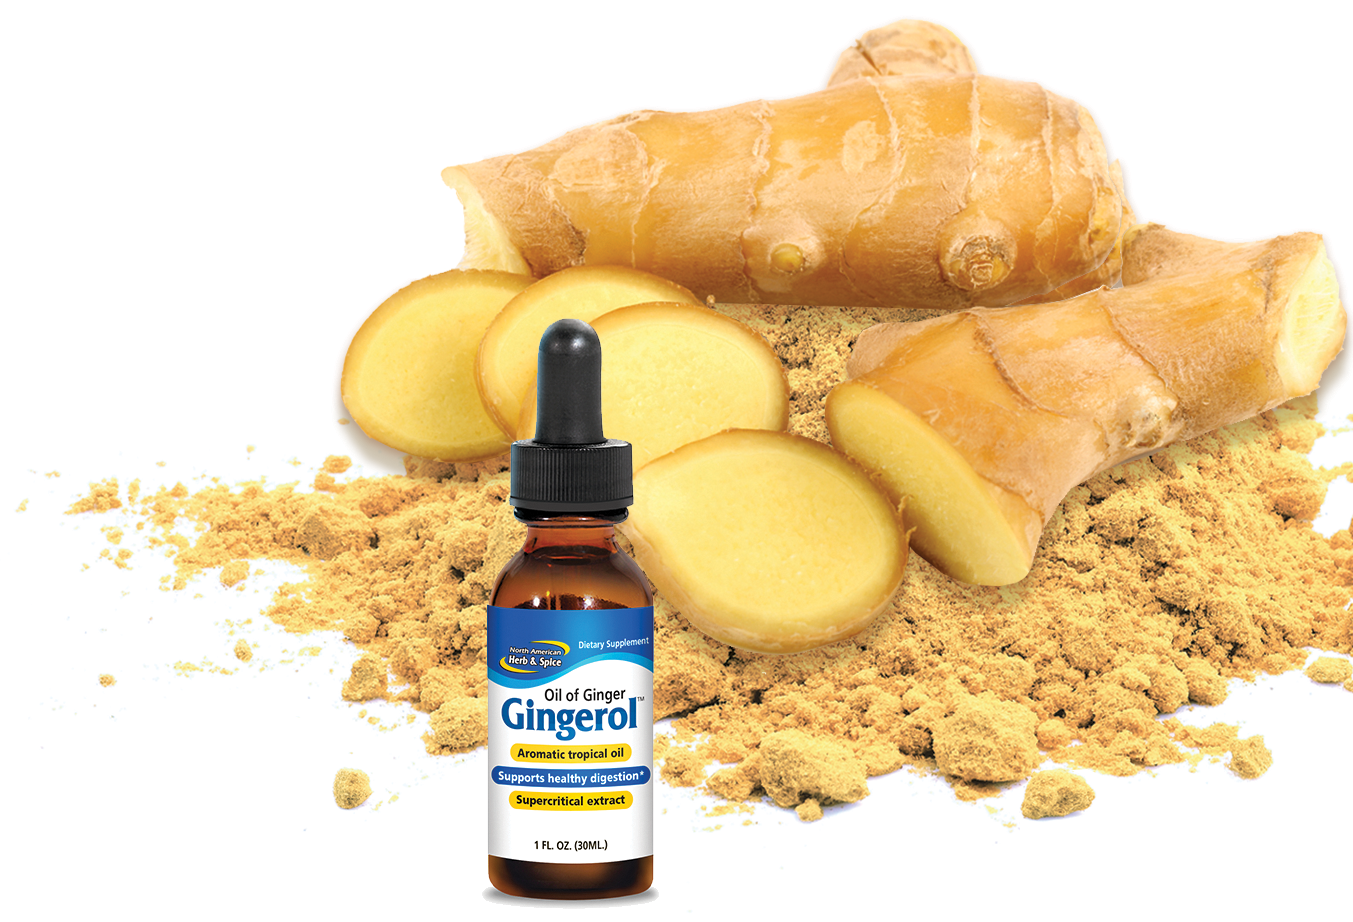 Raw ginger with Gingerol product bottle